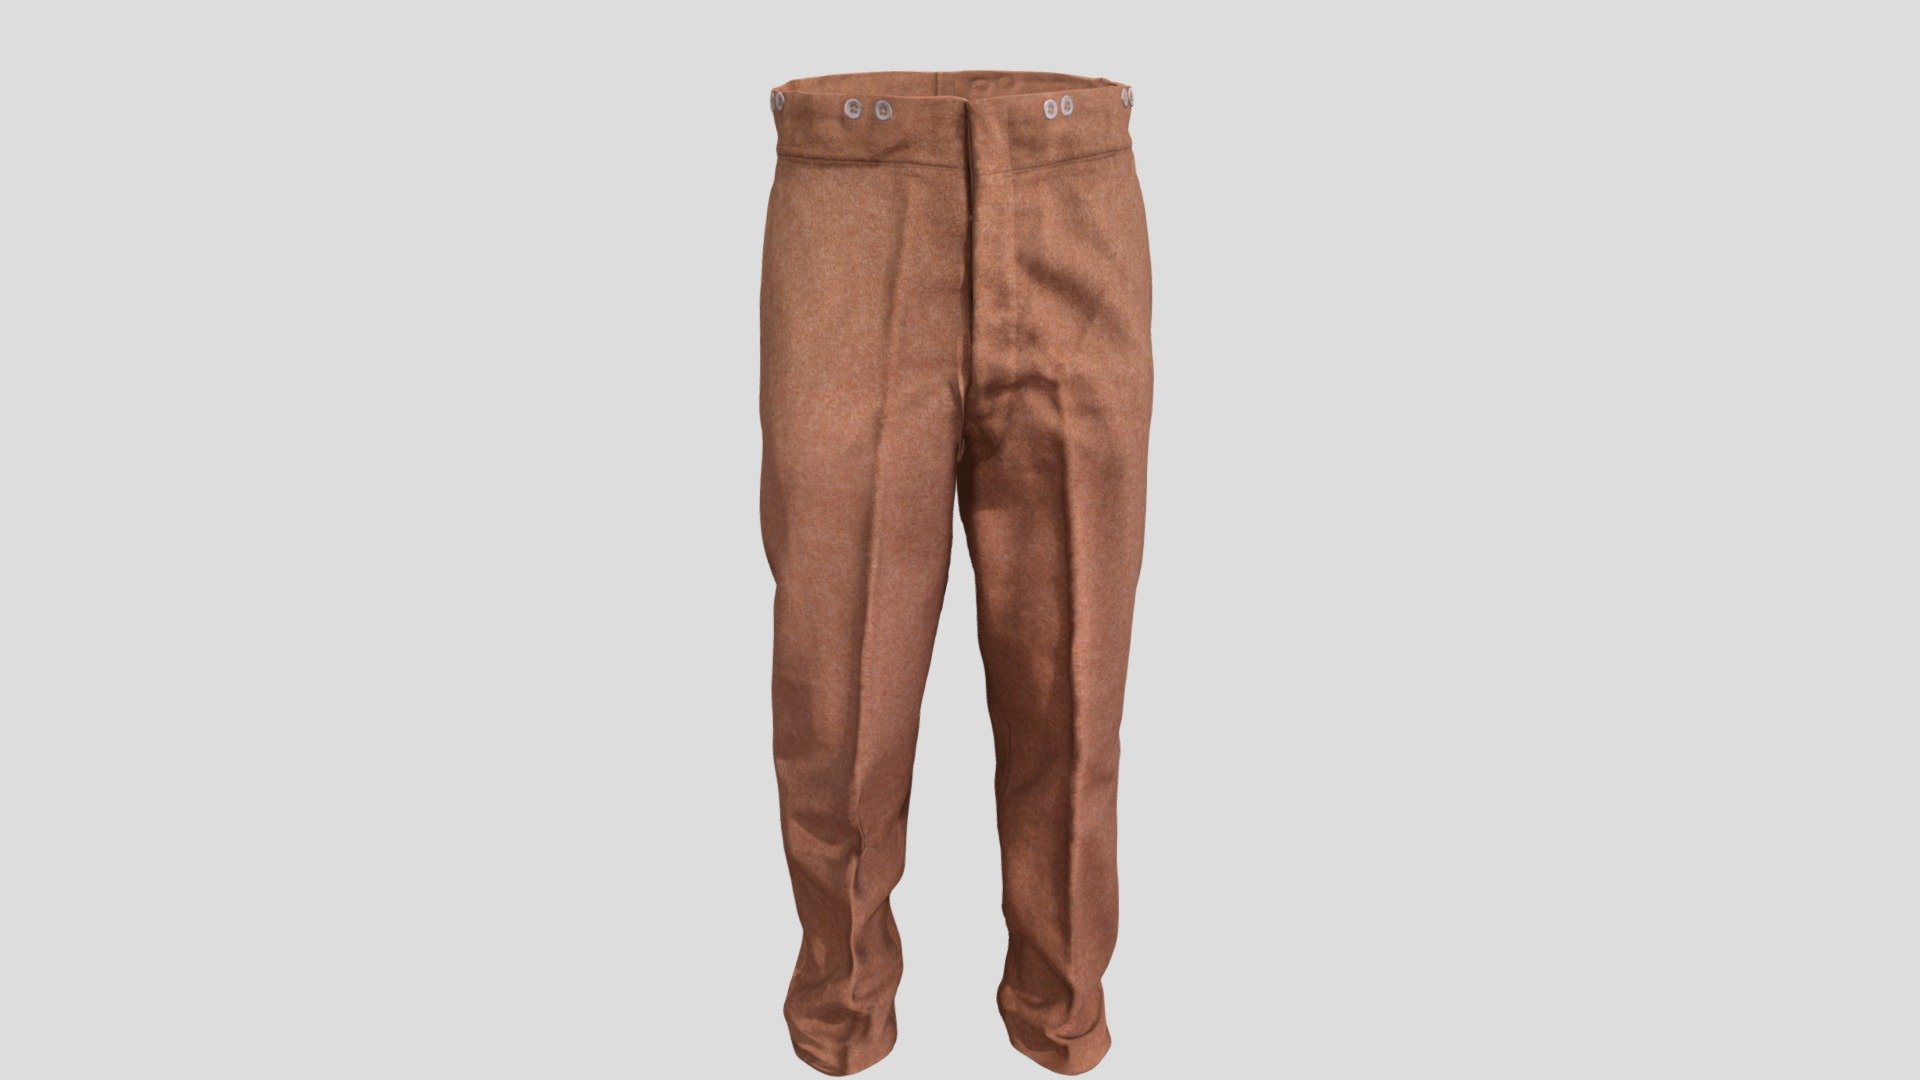 WW1 unlined Sergeants khaki trousers. 
The bottoms to the jacket (see model), which is made from the same wool/tweed that would have been incredibly uncomfortable to wear and probably irritated the skin. There are 8 buttons lining the waist band of the trousers, in sets of four sets of two buttons going across, and there is then 4 buttons going down the front of the trousers which were incredibly stiff to undo and redo. There are two welt pockets either side. Much like the jacket, there is no lining on the trousers which would have made it incredibly uncomfortable to wear 3d model